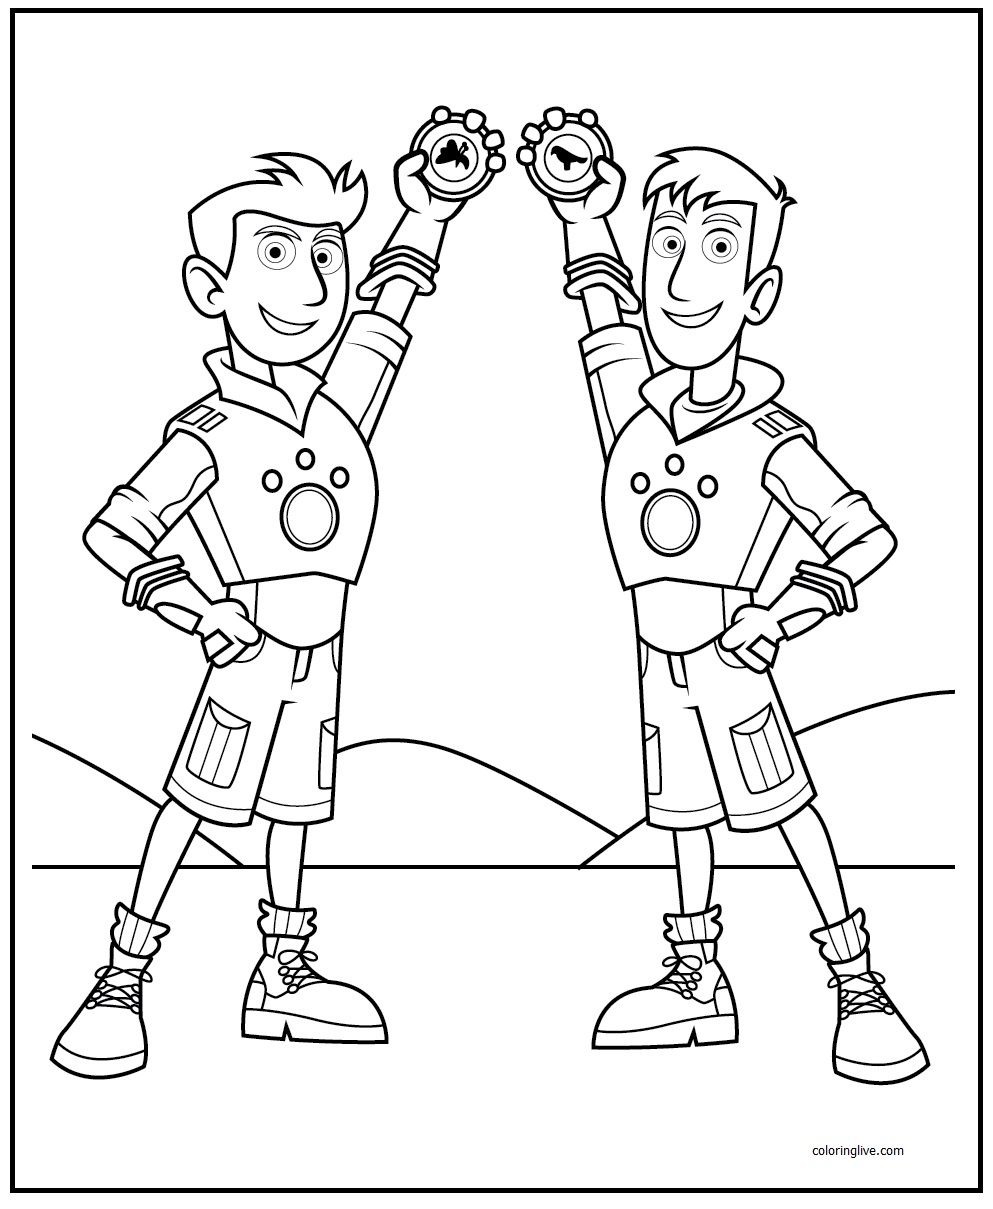 Printable Kratt Brothers Coloring Page for kids.